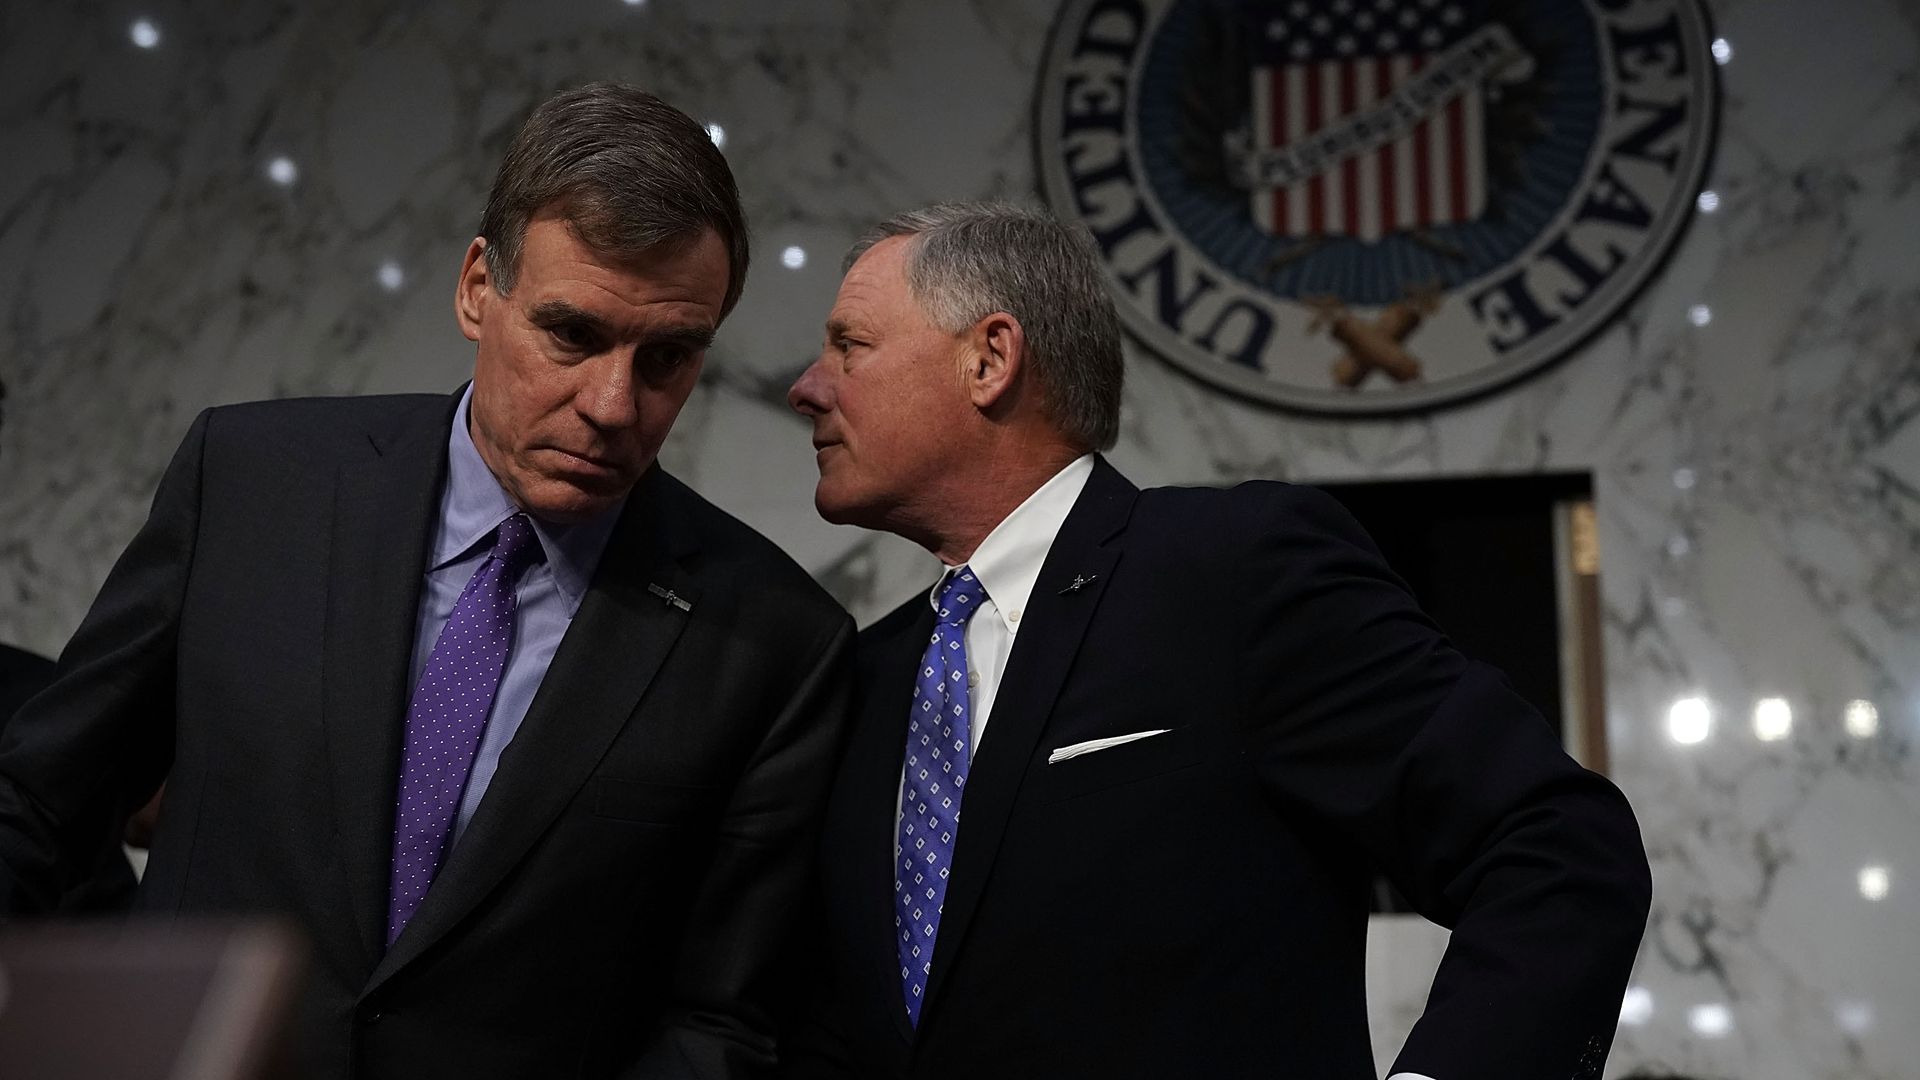 The leaders of the intelligence committee speaking